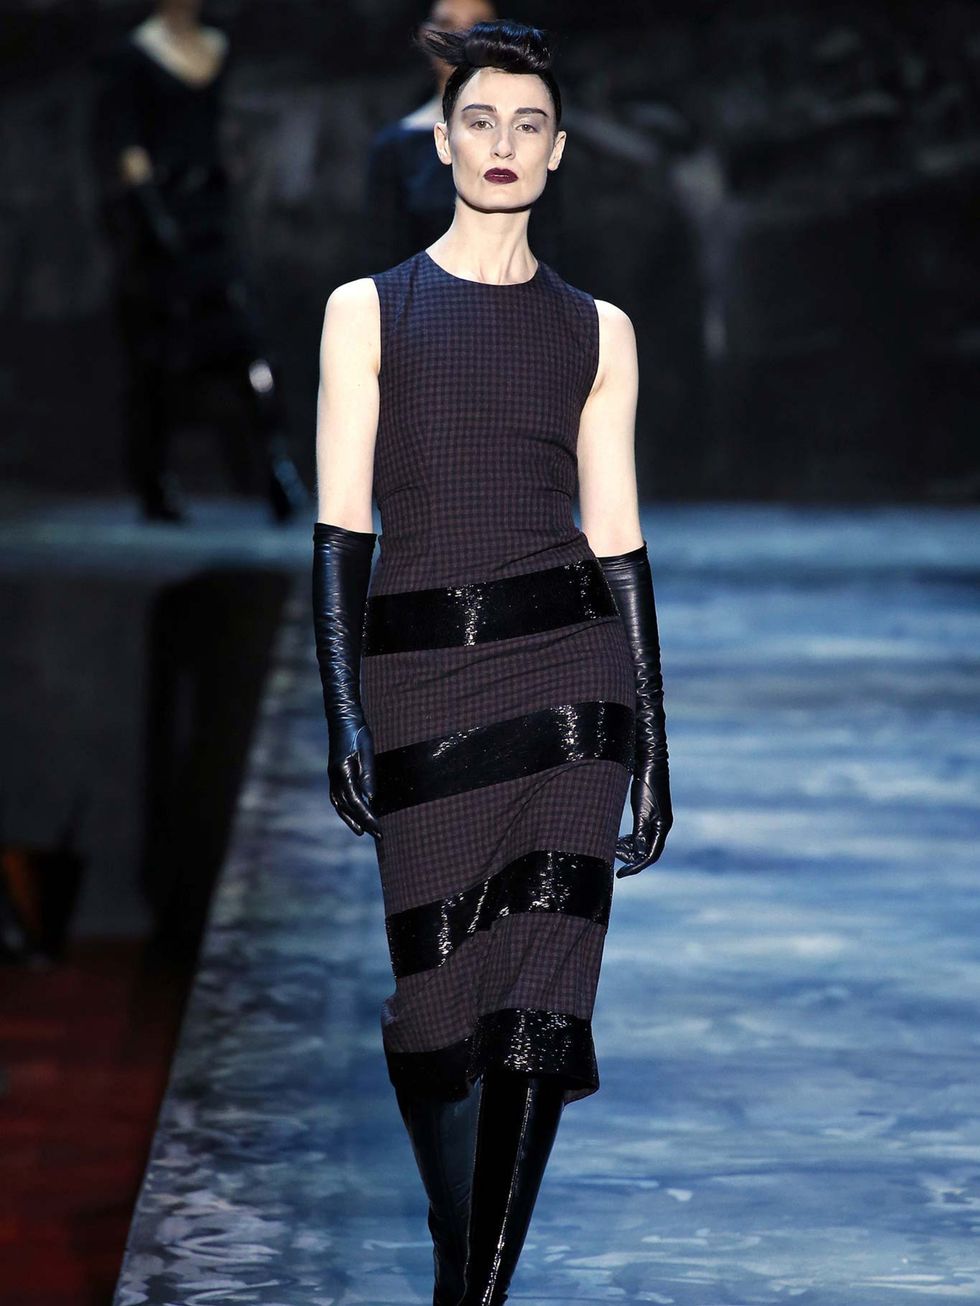 Erin O'Connor opens the Marc Jacob FW15 catwalk